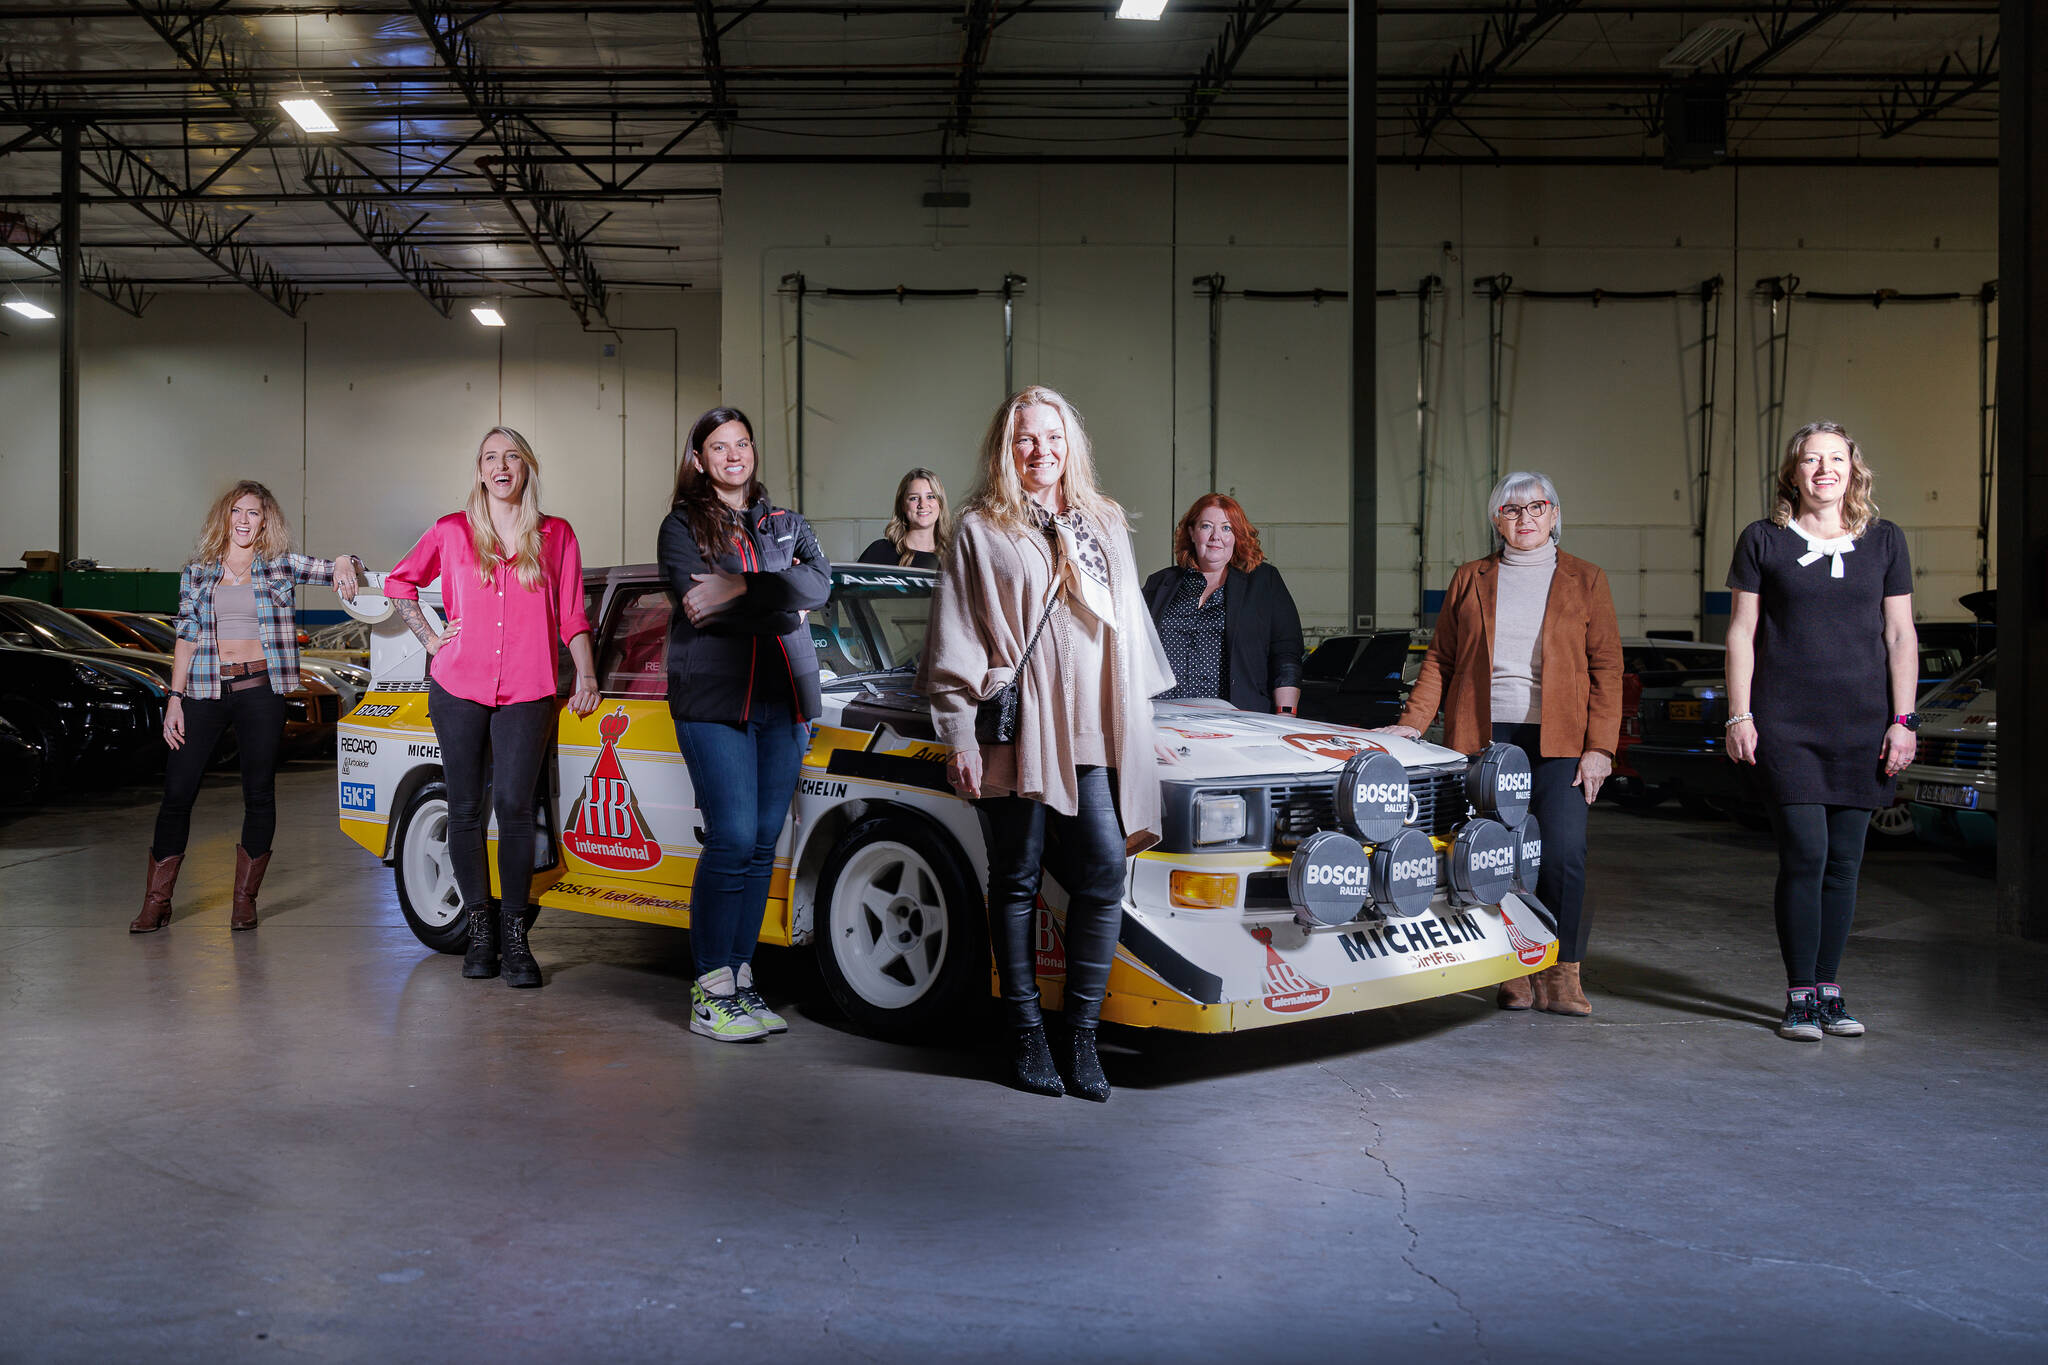 Left to right: (front) Vanessa Ruck, professional motorcycle racer; Jndia Erbacher, Top Fuel drag racer; Michele Abbate, American Trans-Am driver; Pernilla Solberg, rally car driver, co-driver and team manager; (back) Josie Rimmer WIM founder, Becs Williams, lead World Rally Car all live commentator; Michèle Mouton, “legend of rally” and World Rally Car Event Champion; and Michelle Miller, rally car driver, co-driver and DirtFish senior instructor. Photo courtesy of Karl Noakes